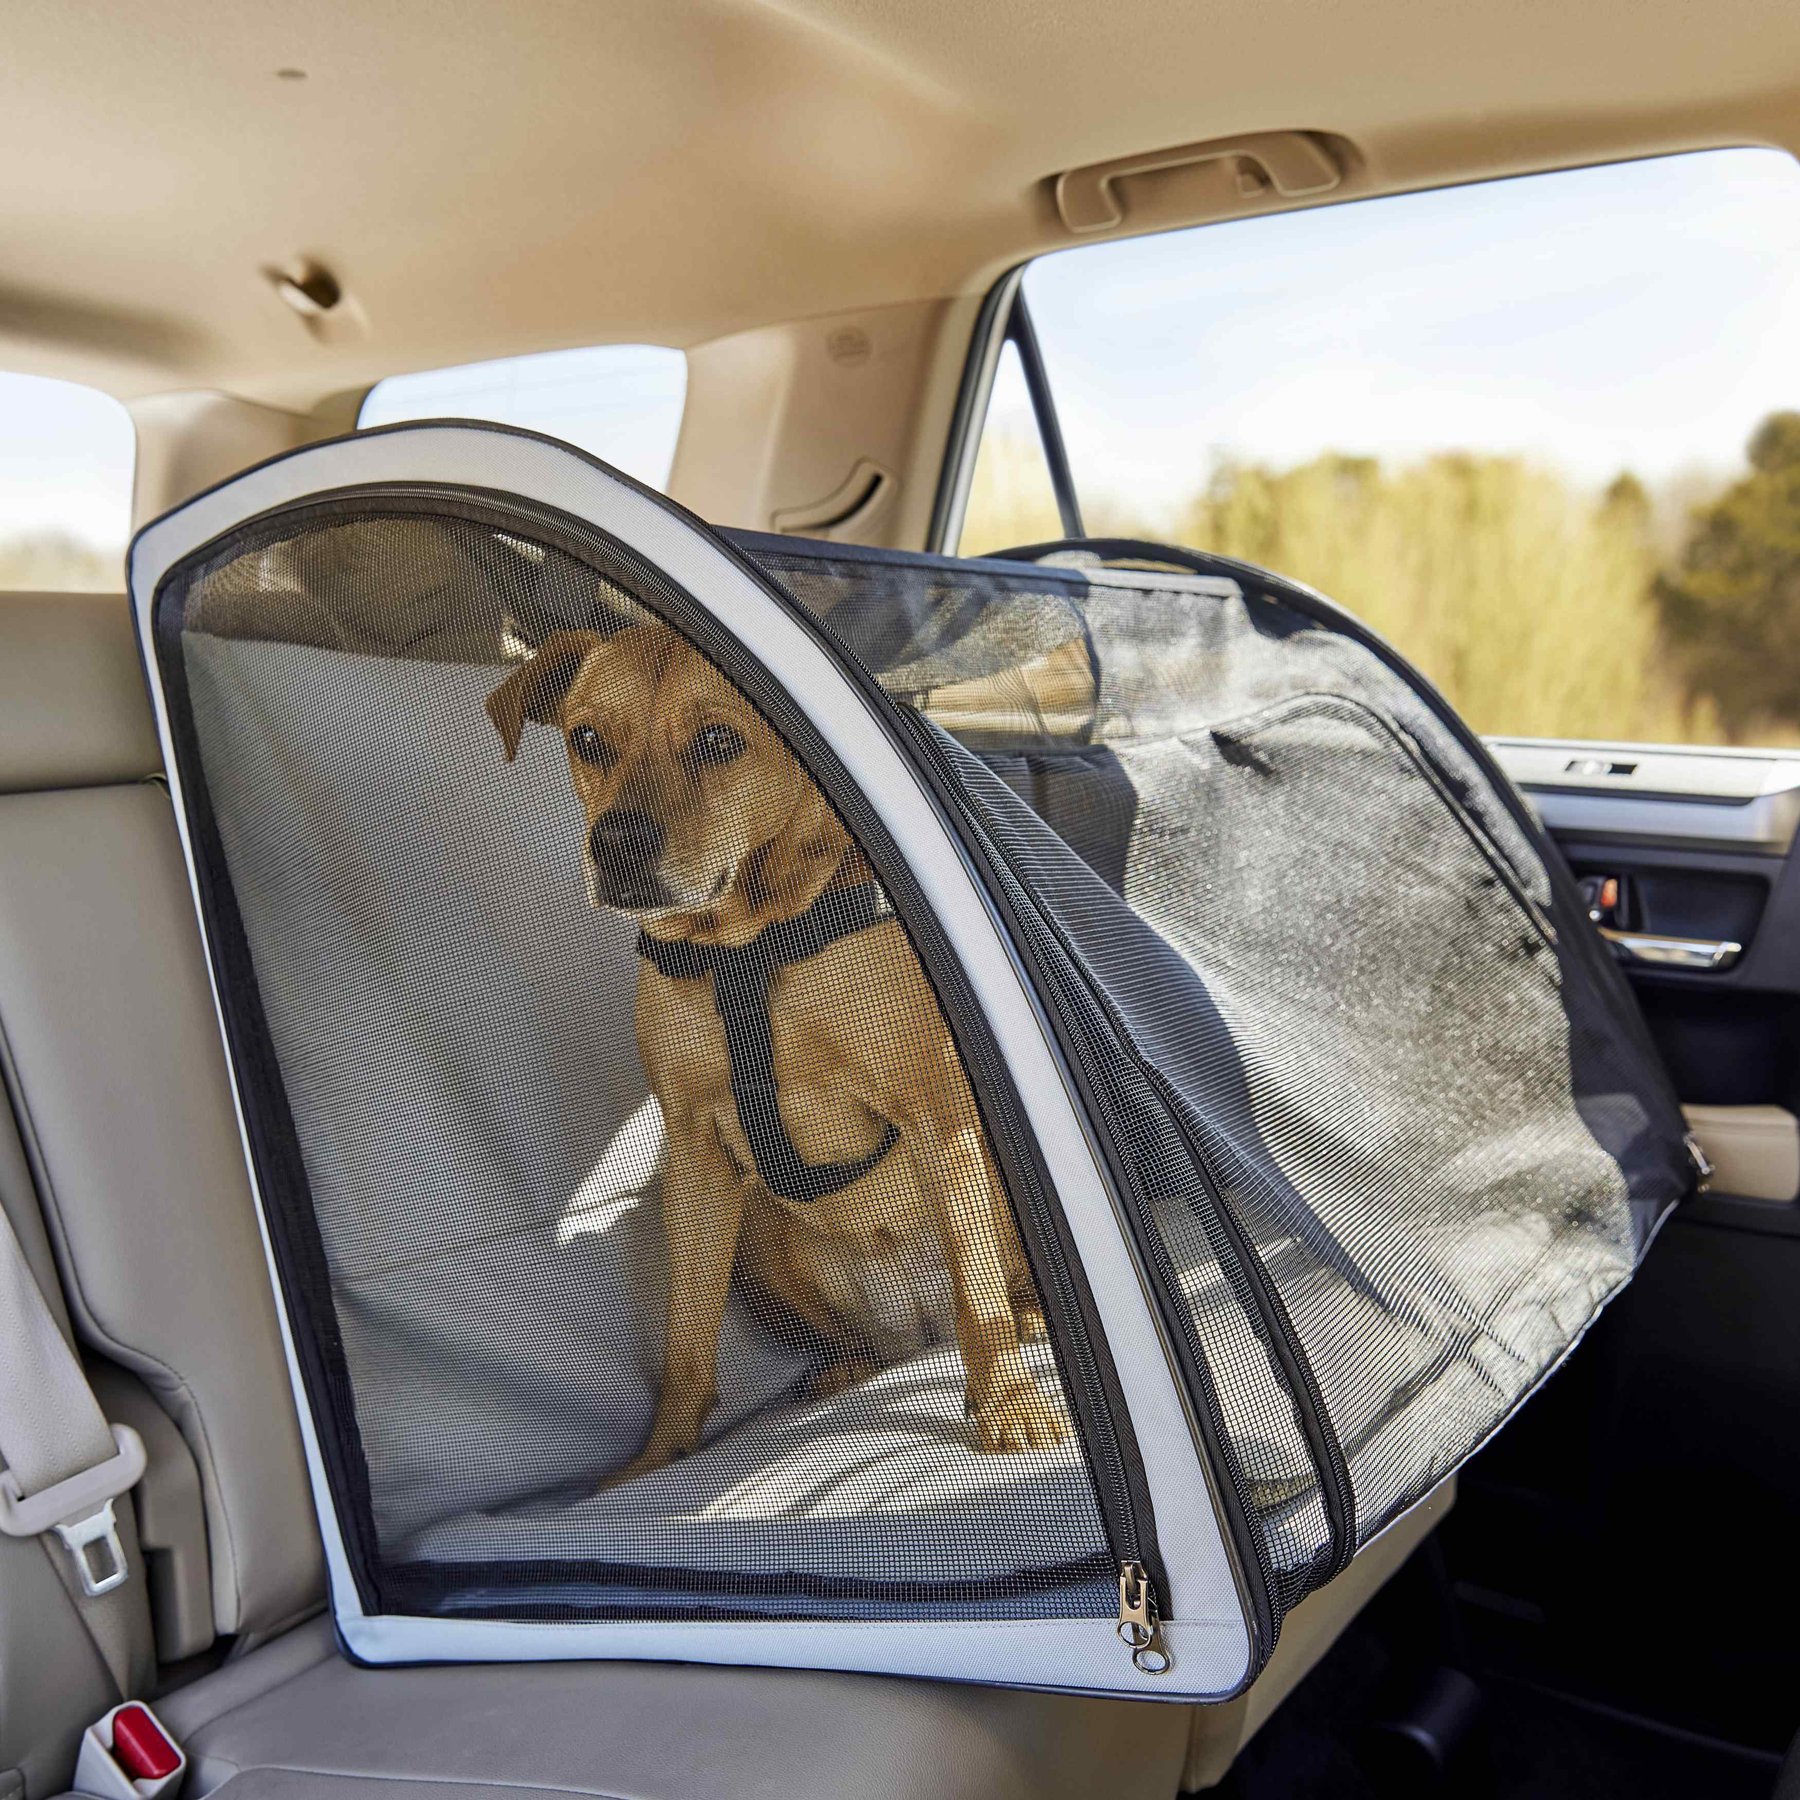 Microvelvet Print Hammock Car Seat Protector for Dogs - Great Gear And  Gifts For Dogs at Home or On-The-Go